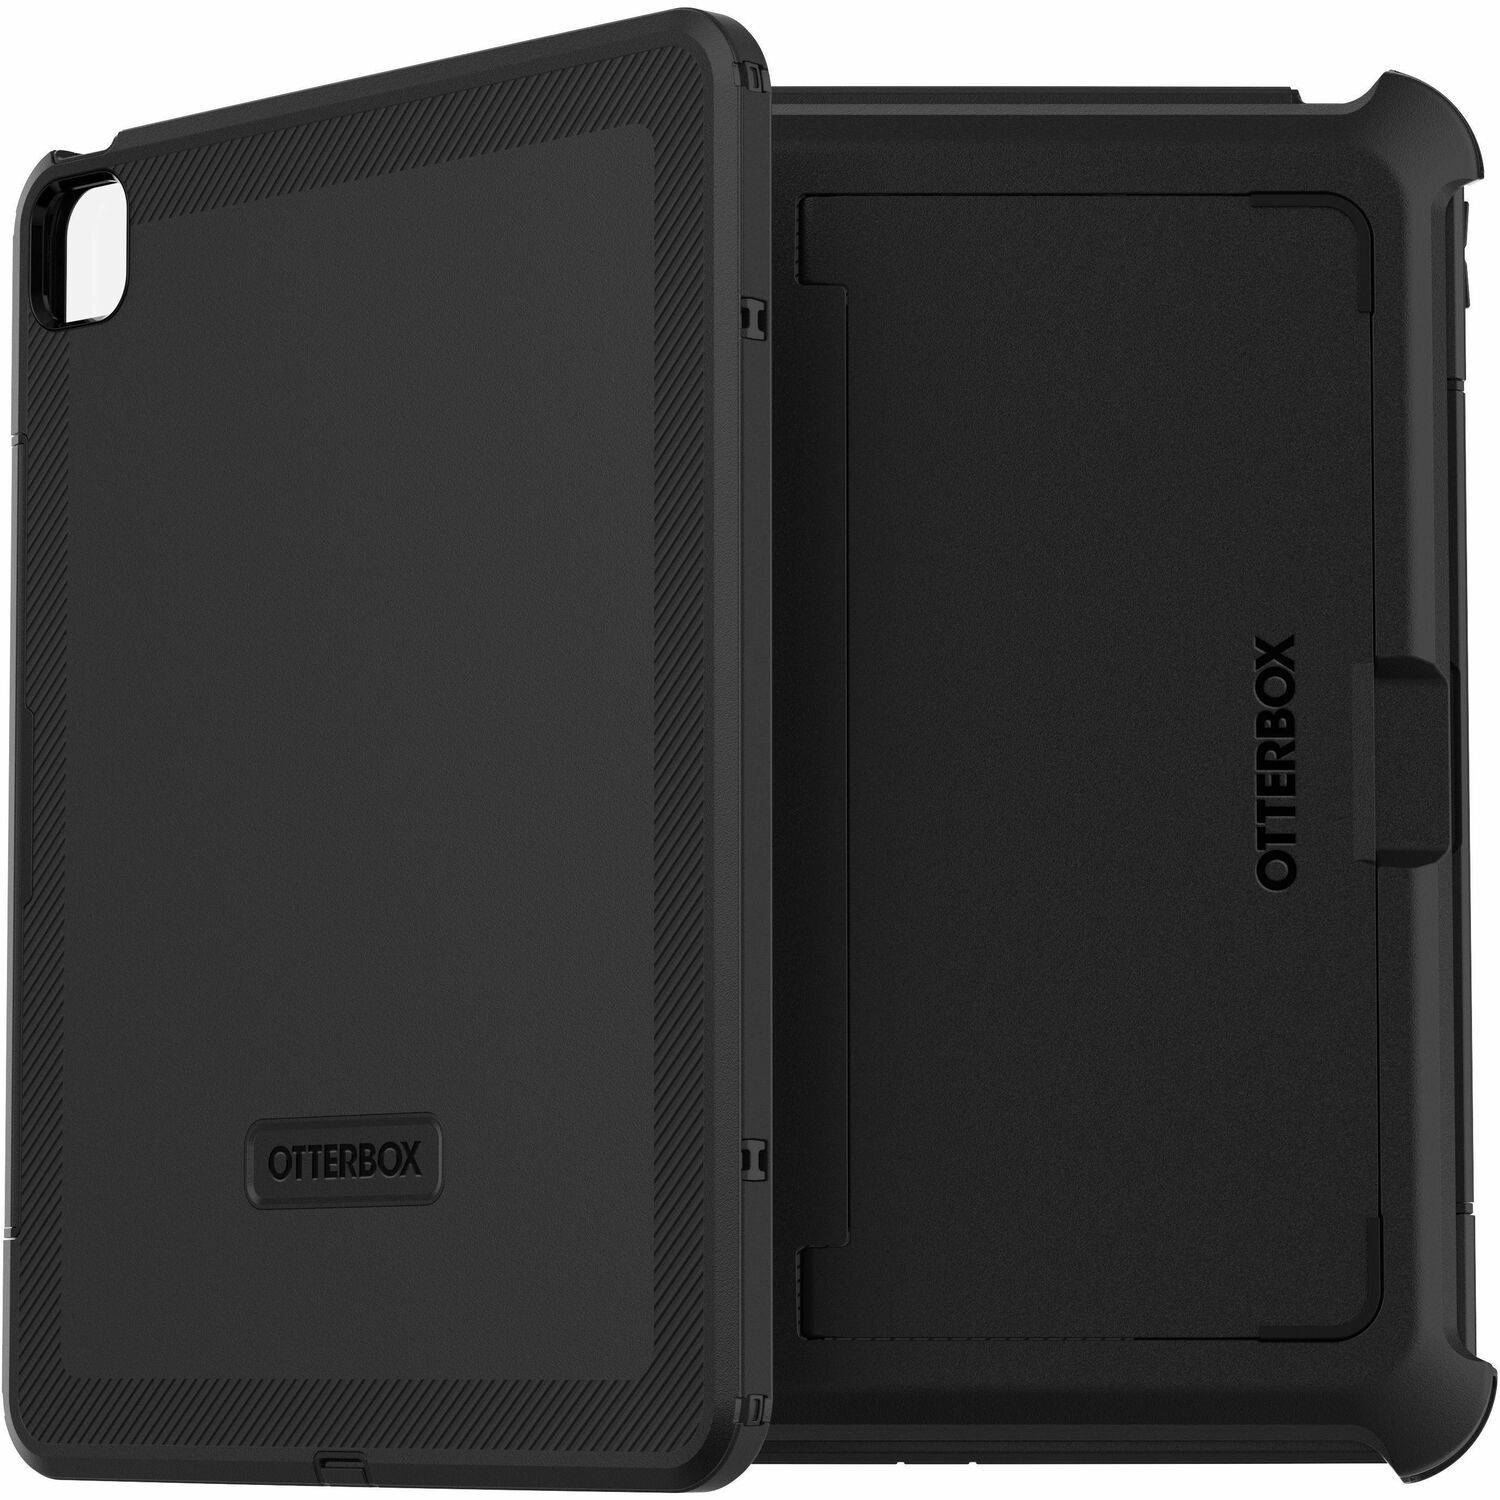 OtterBox Defender Rugged Case for Apple iPad Pro (7th Generation) Tablet - Black - Retail